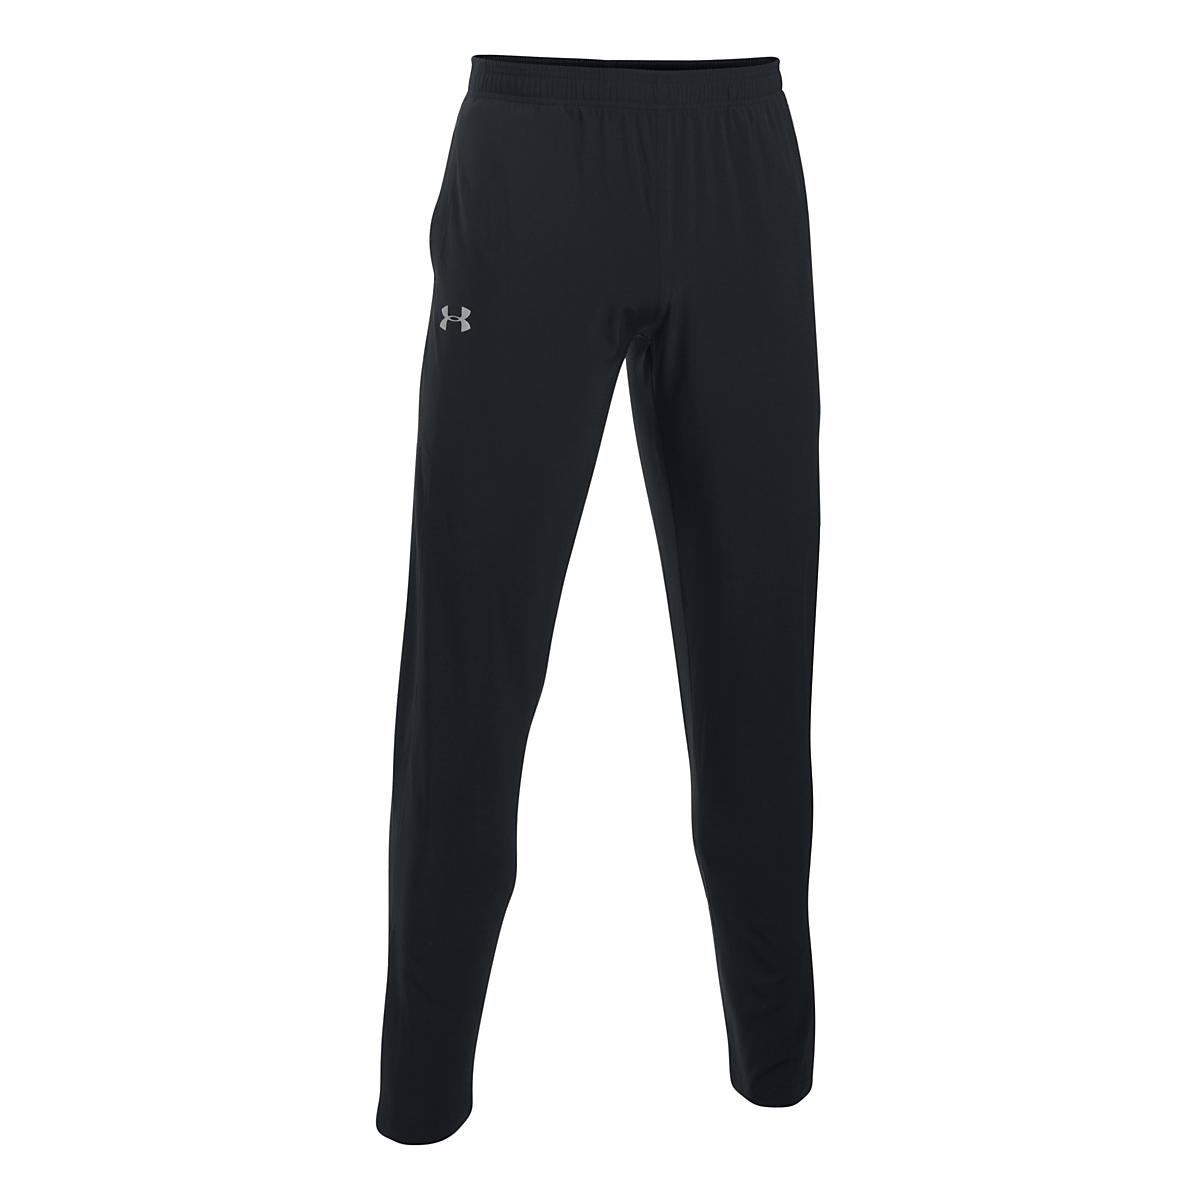 Mens Under Armour No Breaks SW Tapered Pants at Road Runner Sports